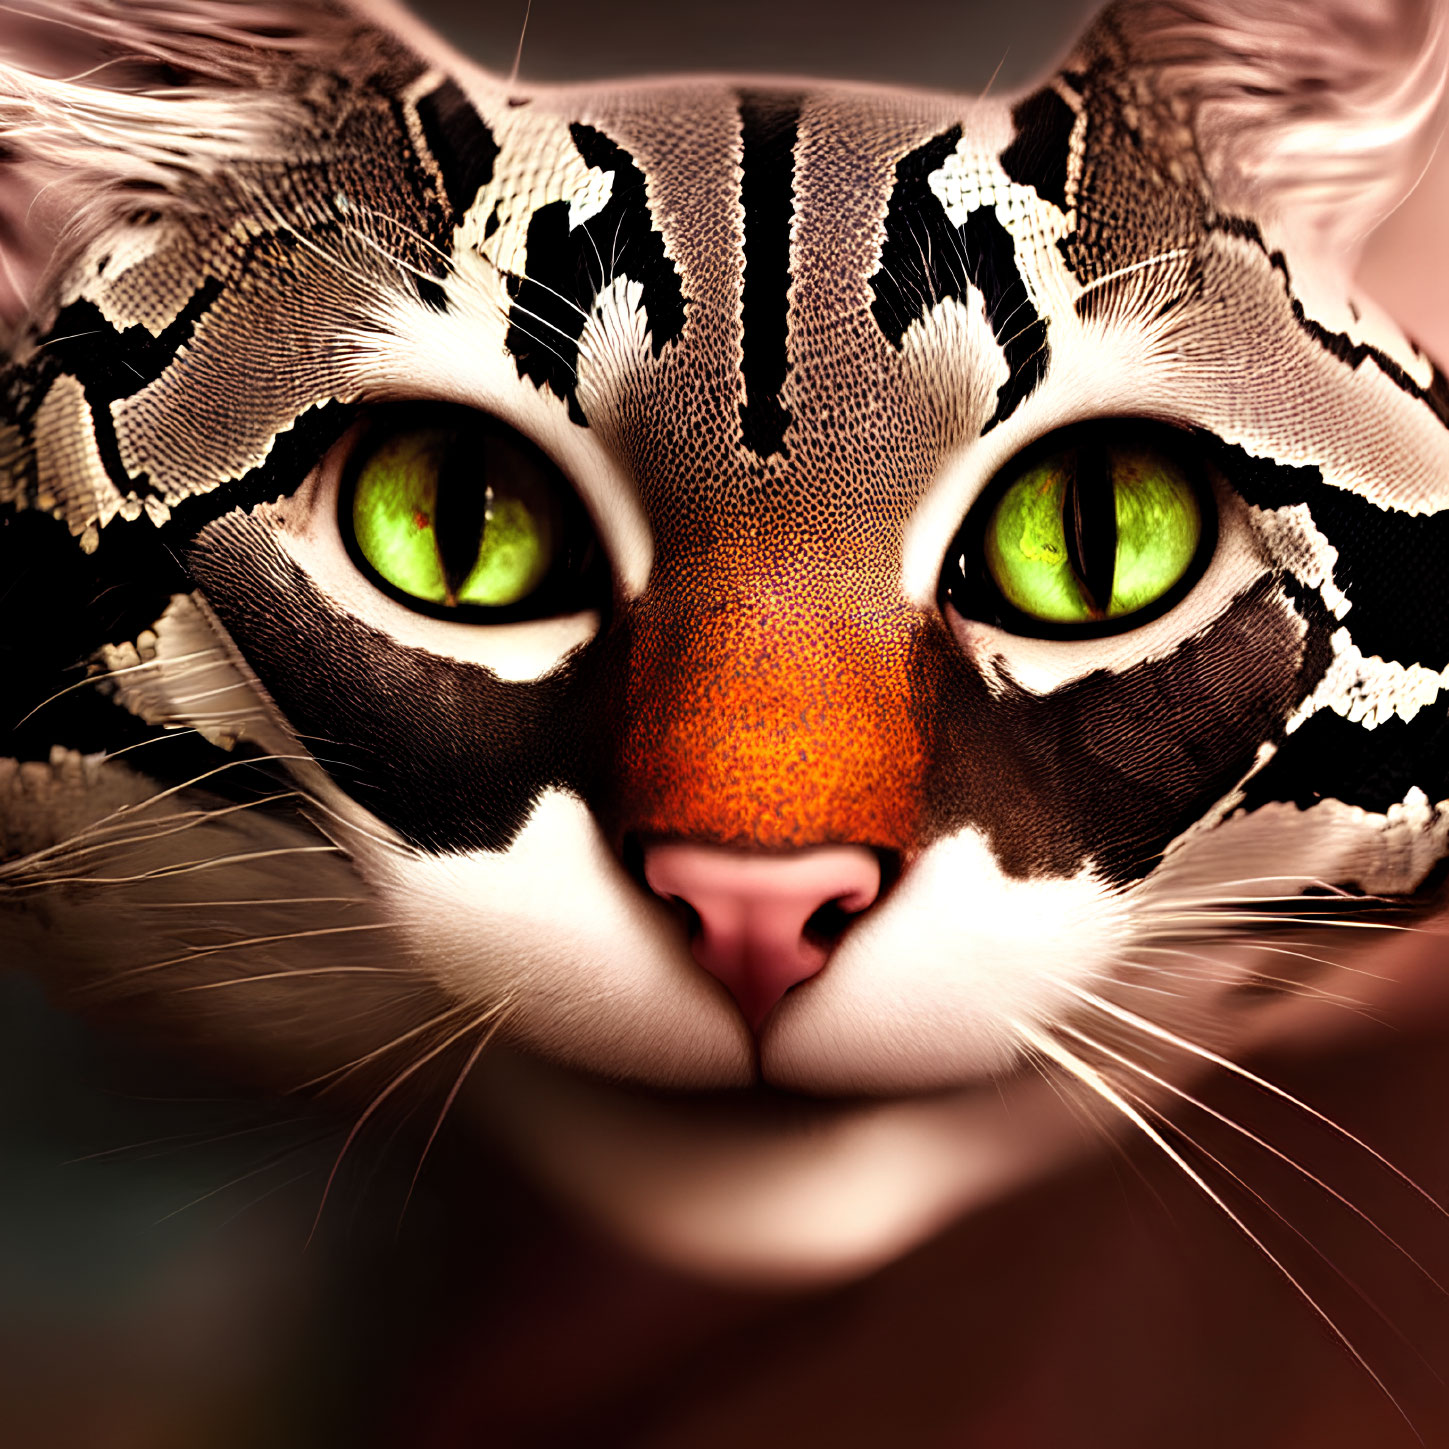 Stylized cat with green eyes and intricate fur patterns